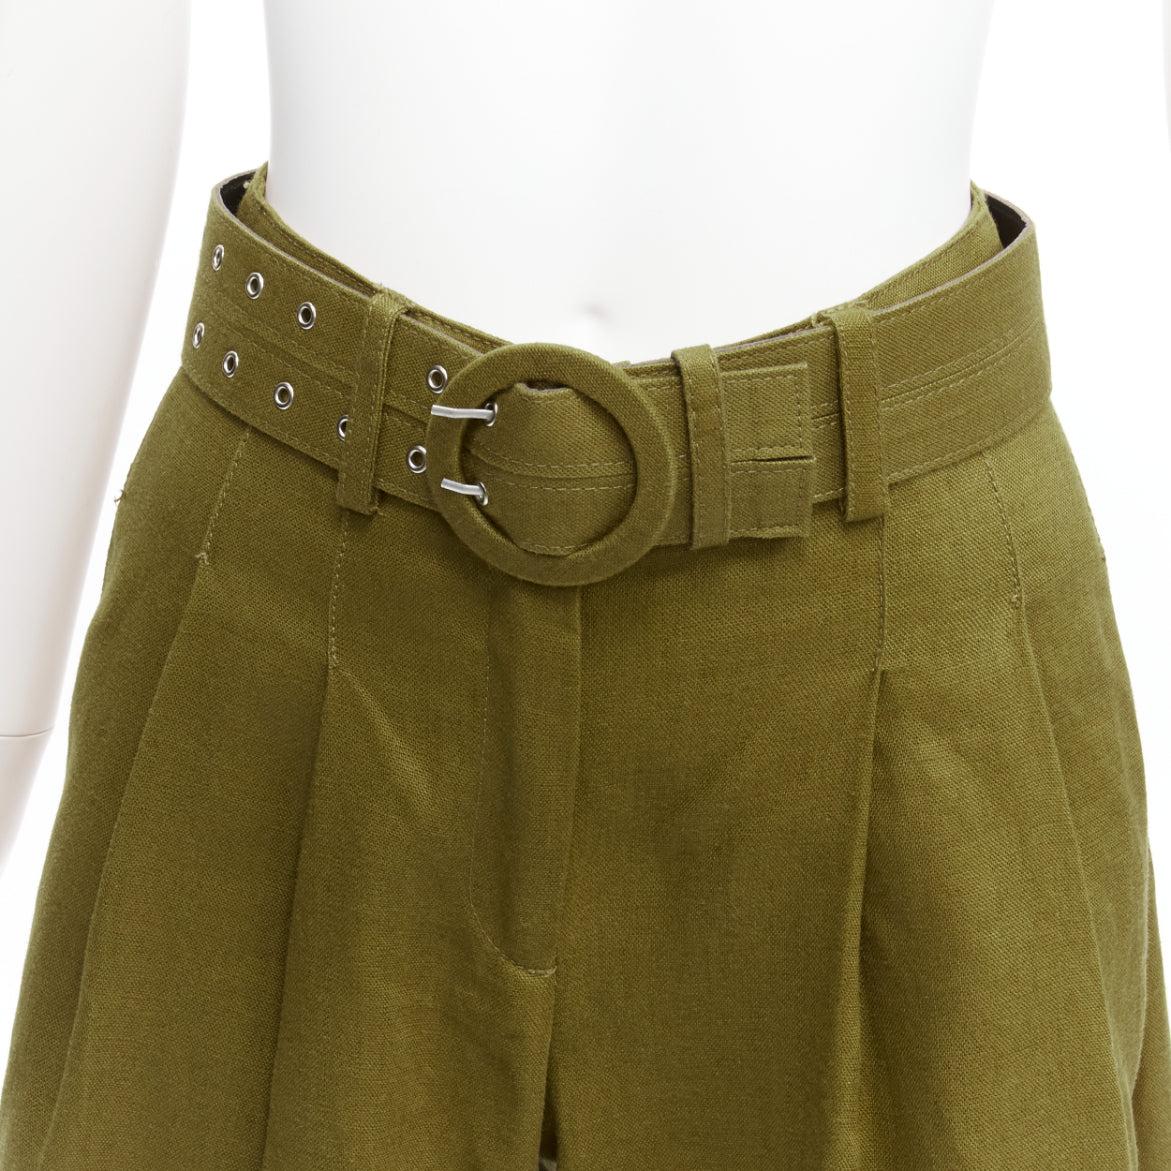 NICHOLAS military green 100% linen high waisted belted wide leg pants US6 M
Reference: SNKO/A00332
Brand: Nicholas
Material: Linen
Color: Green
Pattern: Solid
Closure: Belt
Lining: Green Fabric
Extra Details: Back and front darts flatter bum.
Made